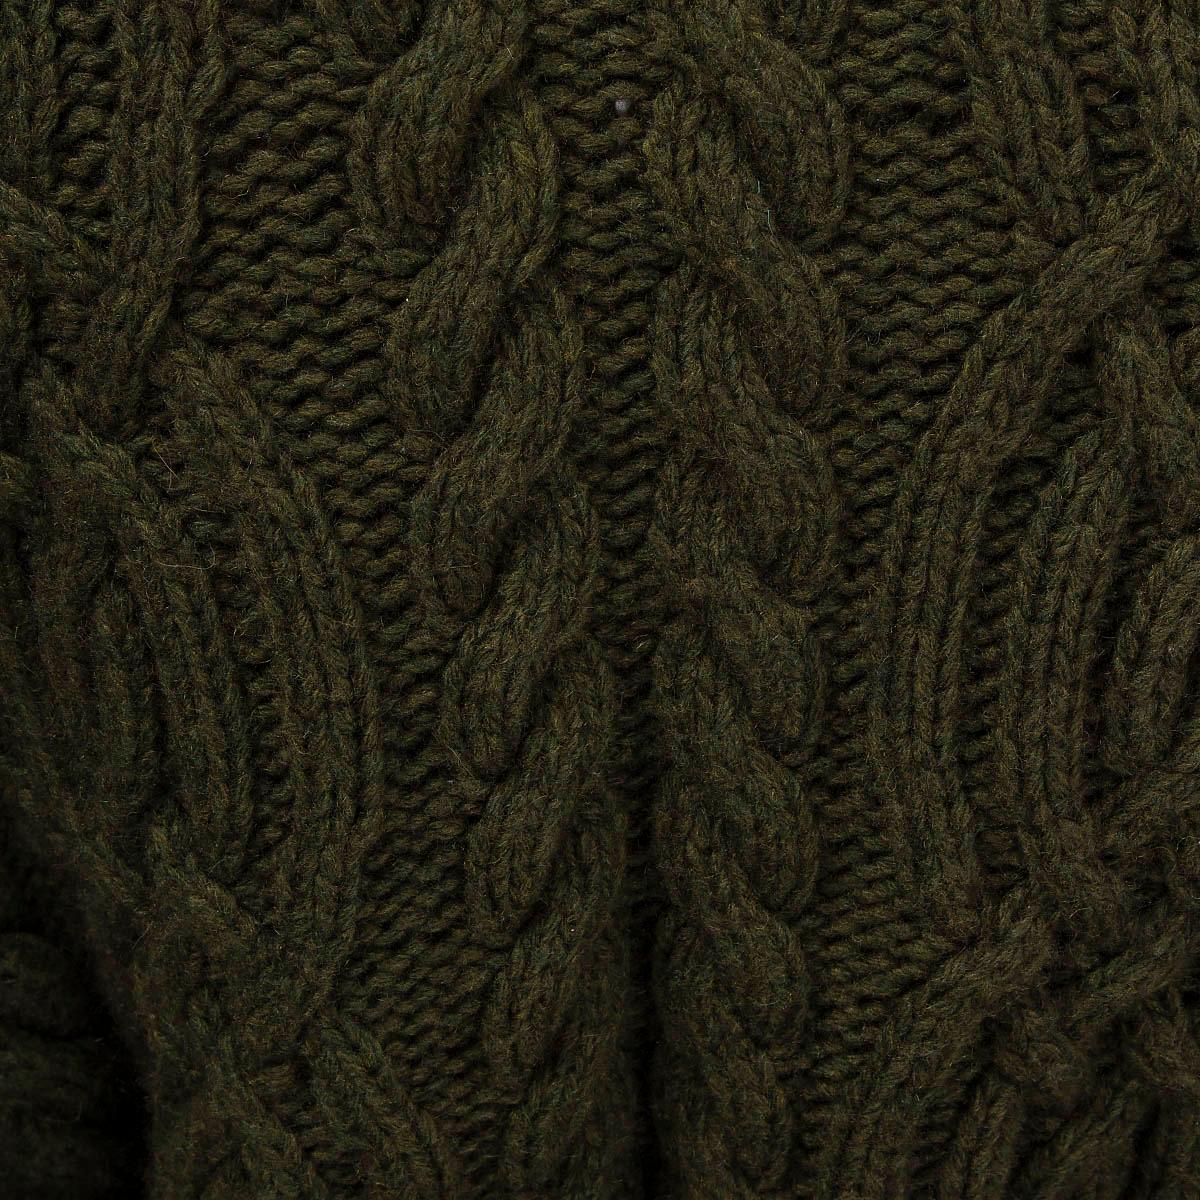 RALPH LAUREN olive green cashmere blend CABLE KNIT Cardigan Sweater XL In Excellent Condition For Sale In Zürich, CH